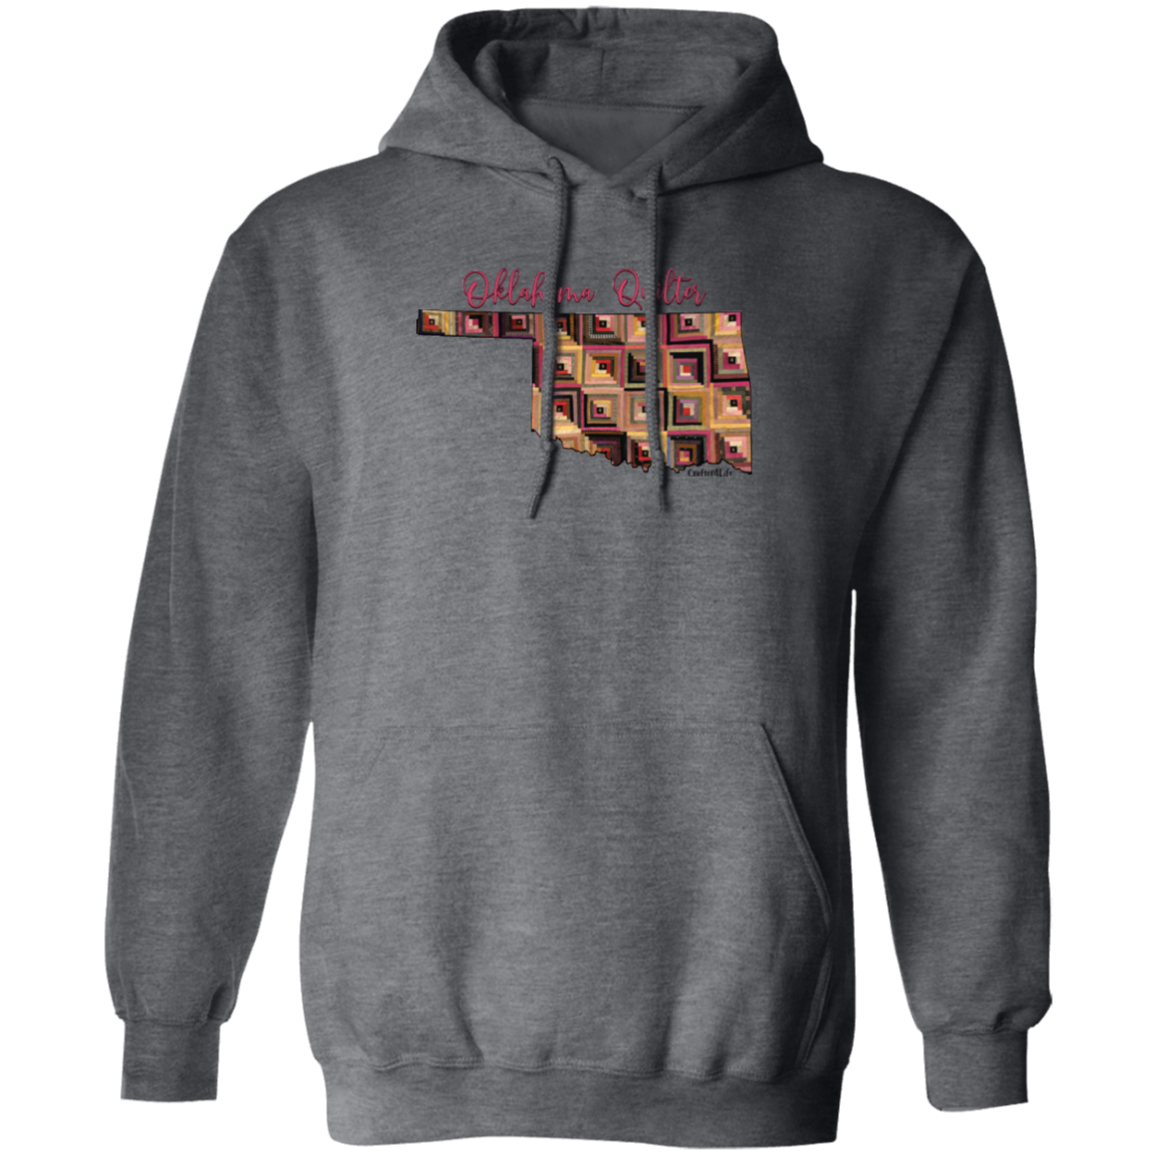 Oklahoma Quilter Pullover Hoodie, Gift for Quilting Friends and Family